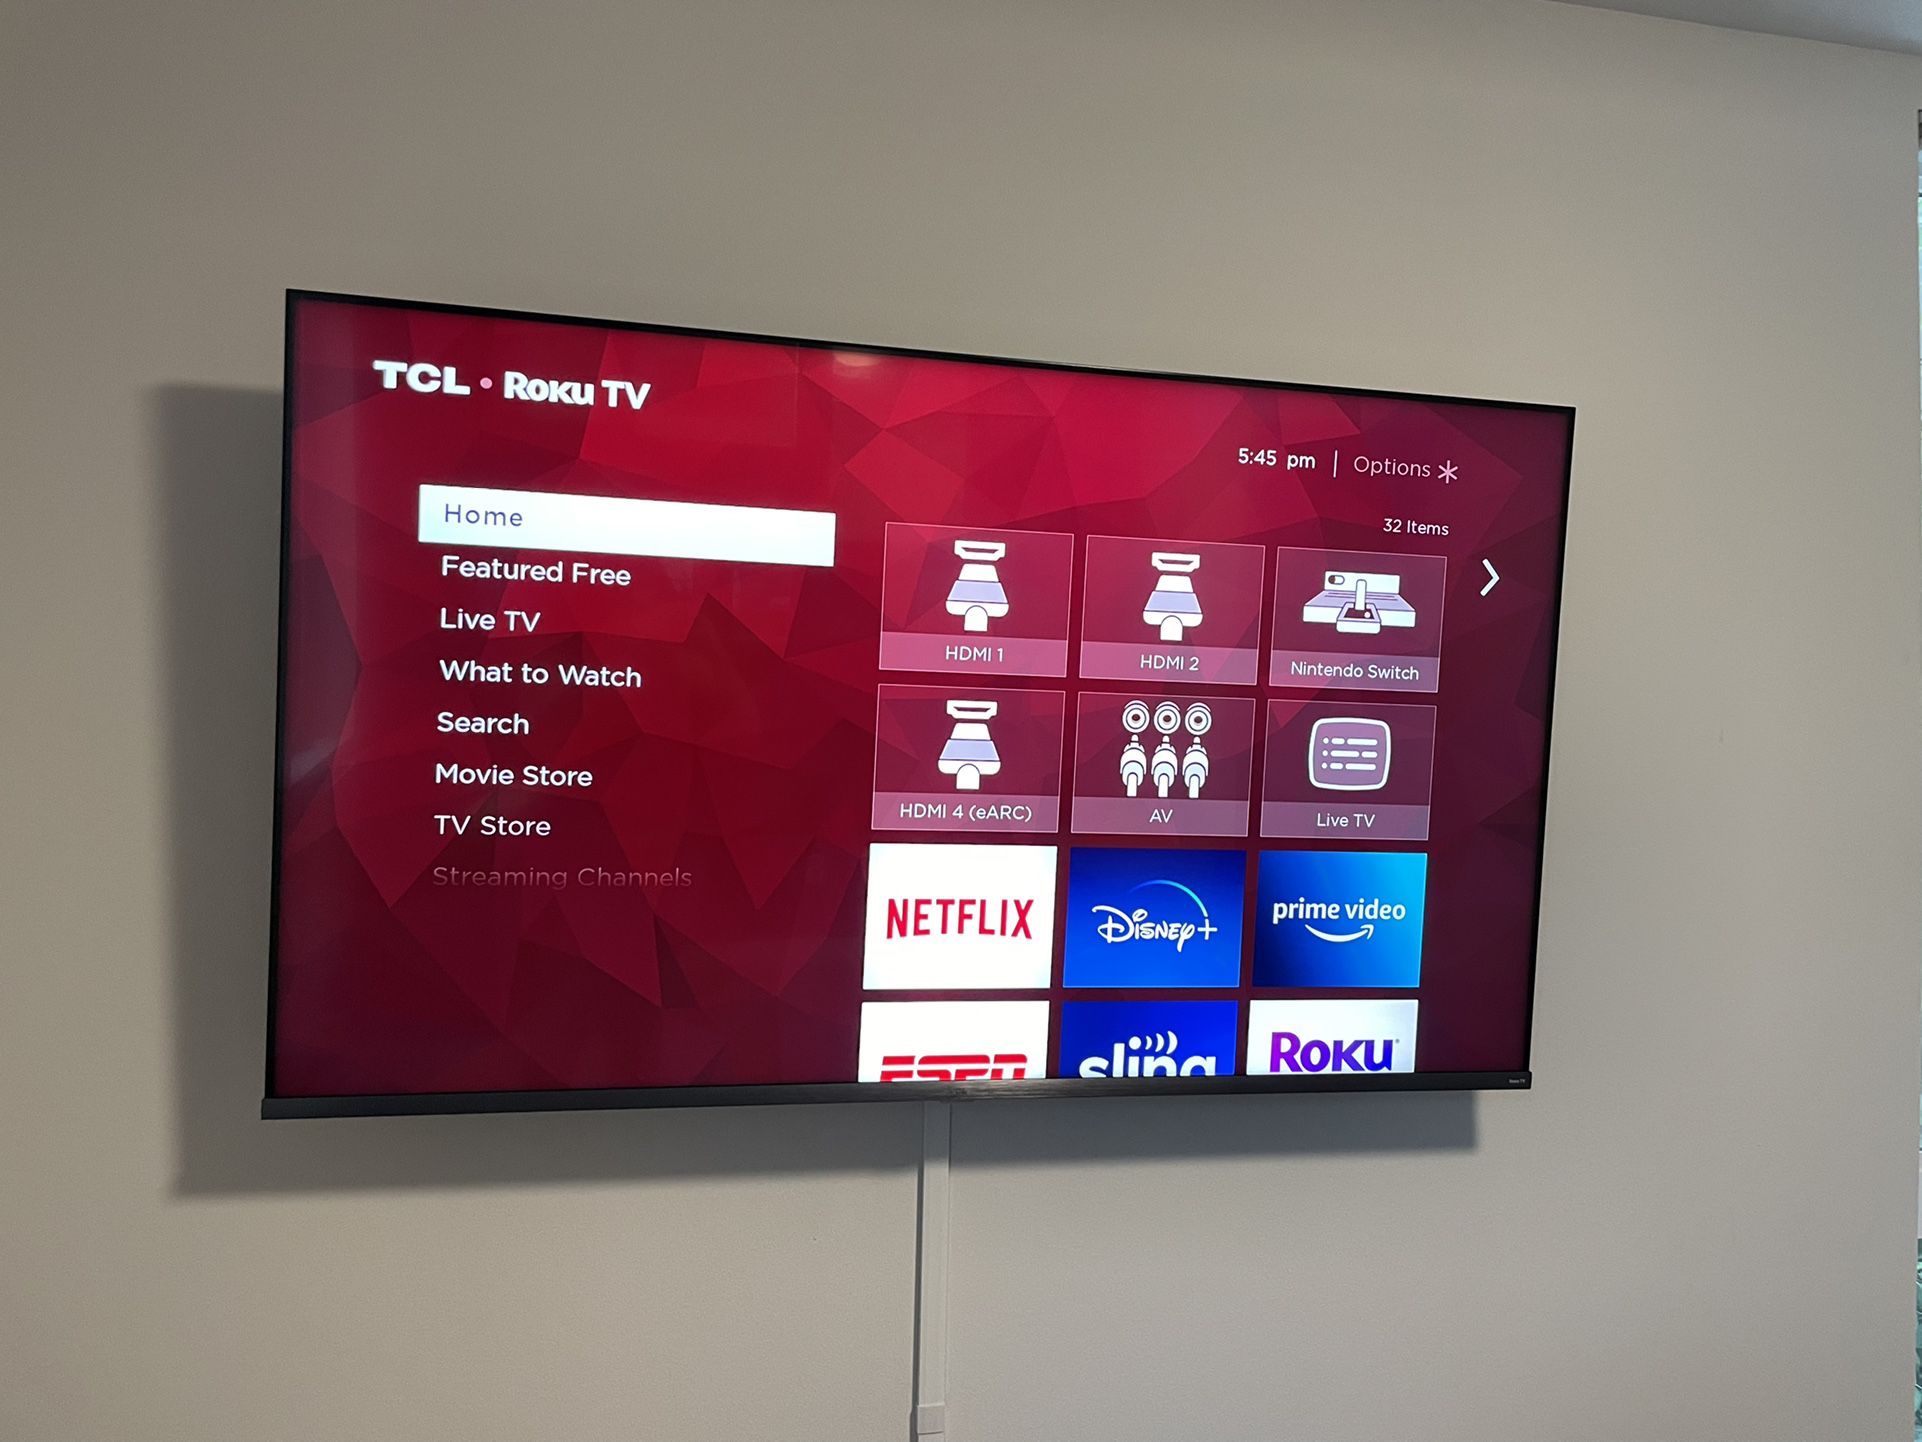 TCL 65” Class LED 8 series - 2160p - Smart - 4K - UHD TV with HDR - Roku TV  Includes Tilt/turn Wall mount 